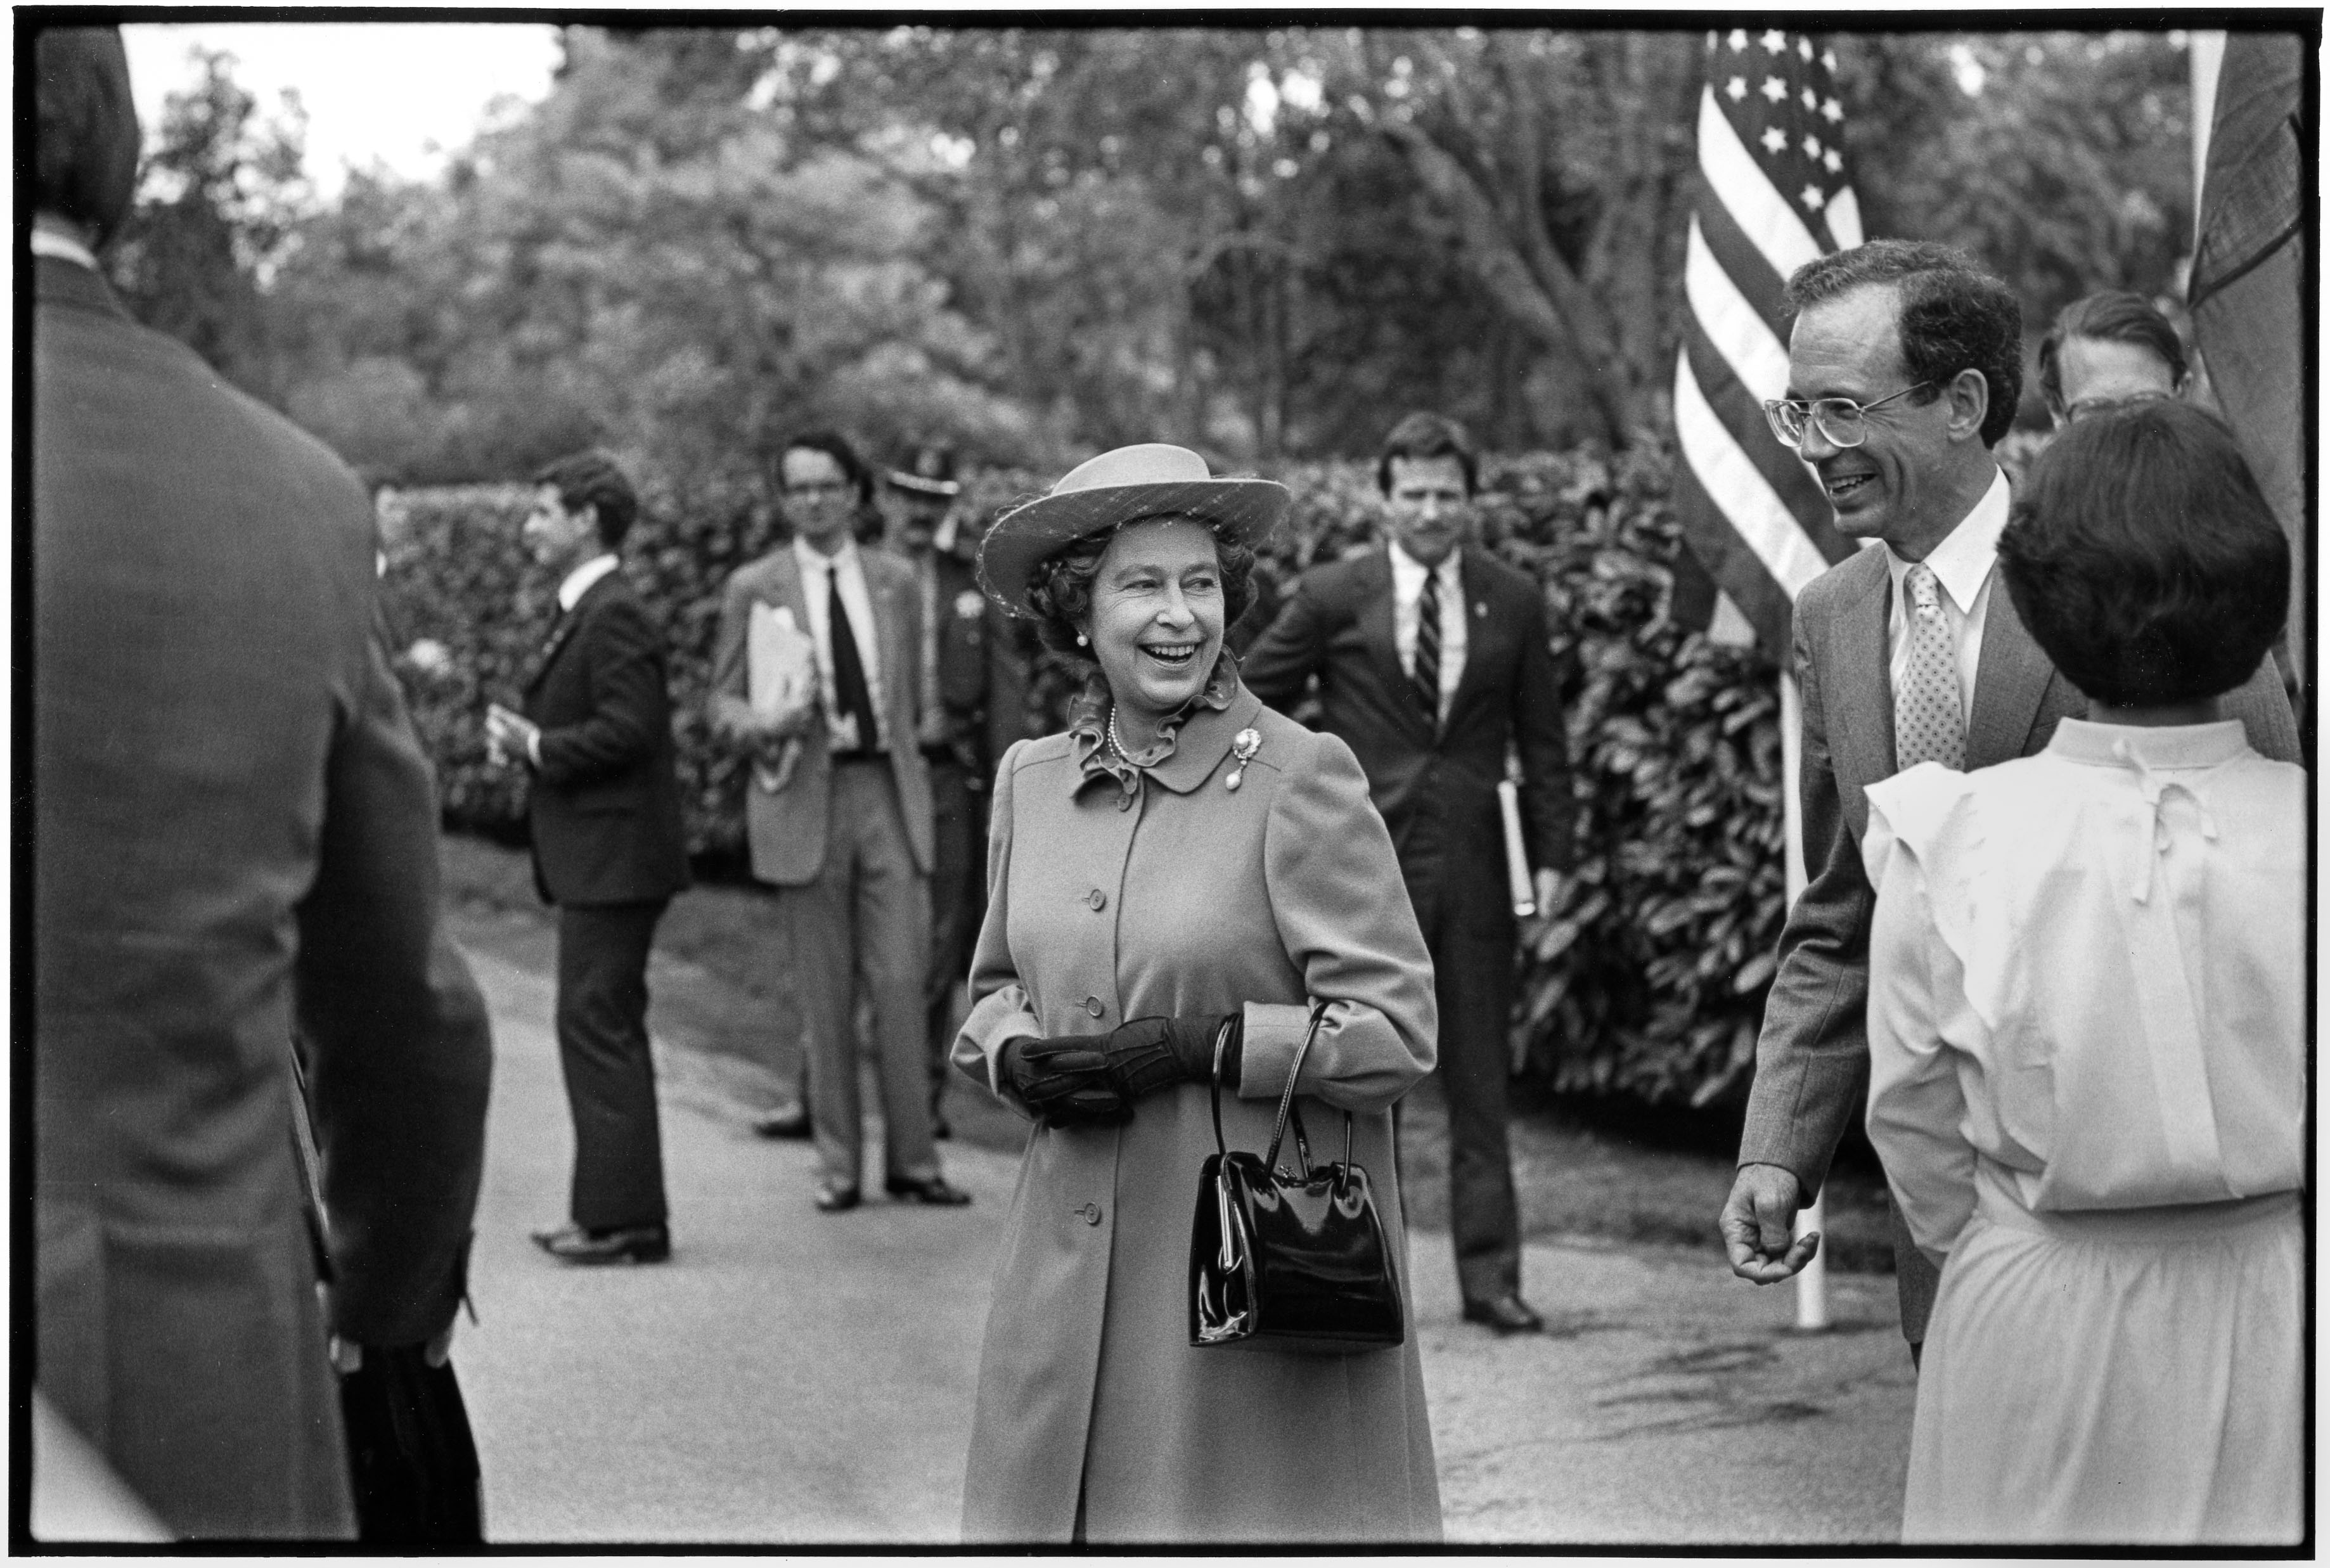 Queen Elizabeth II departs Hoover House following lunch at Stanford University during her West Coast tour of the United States accompanied by Prince Philip on March 3, 1983 in Palo Alto, California.